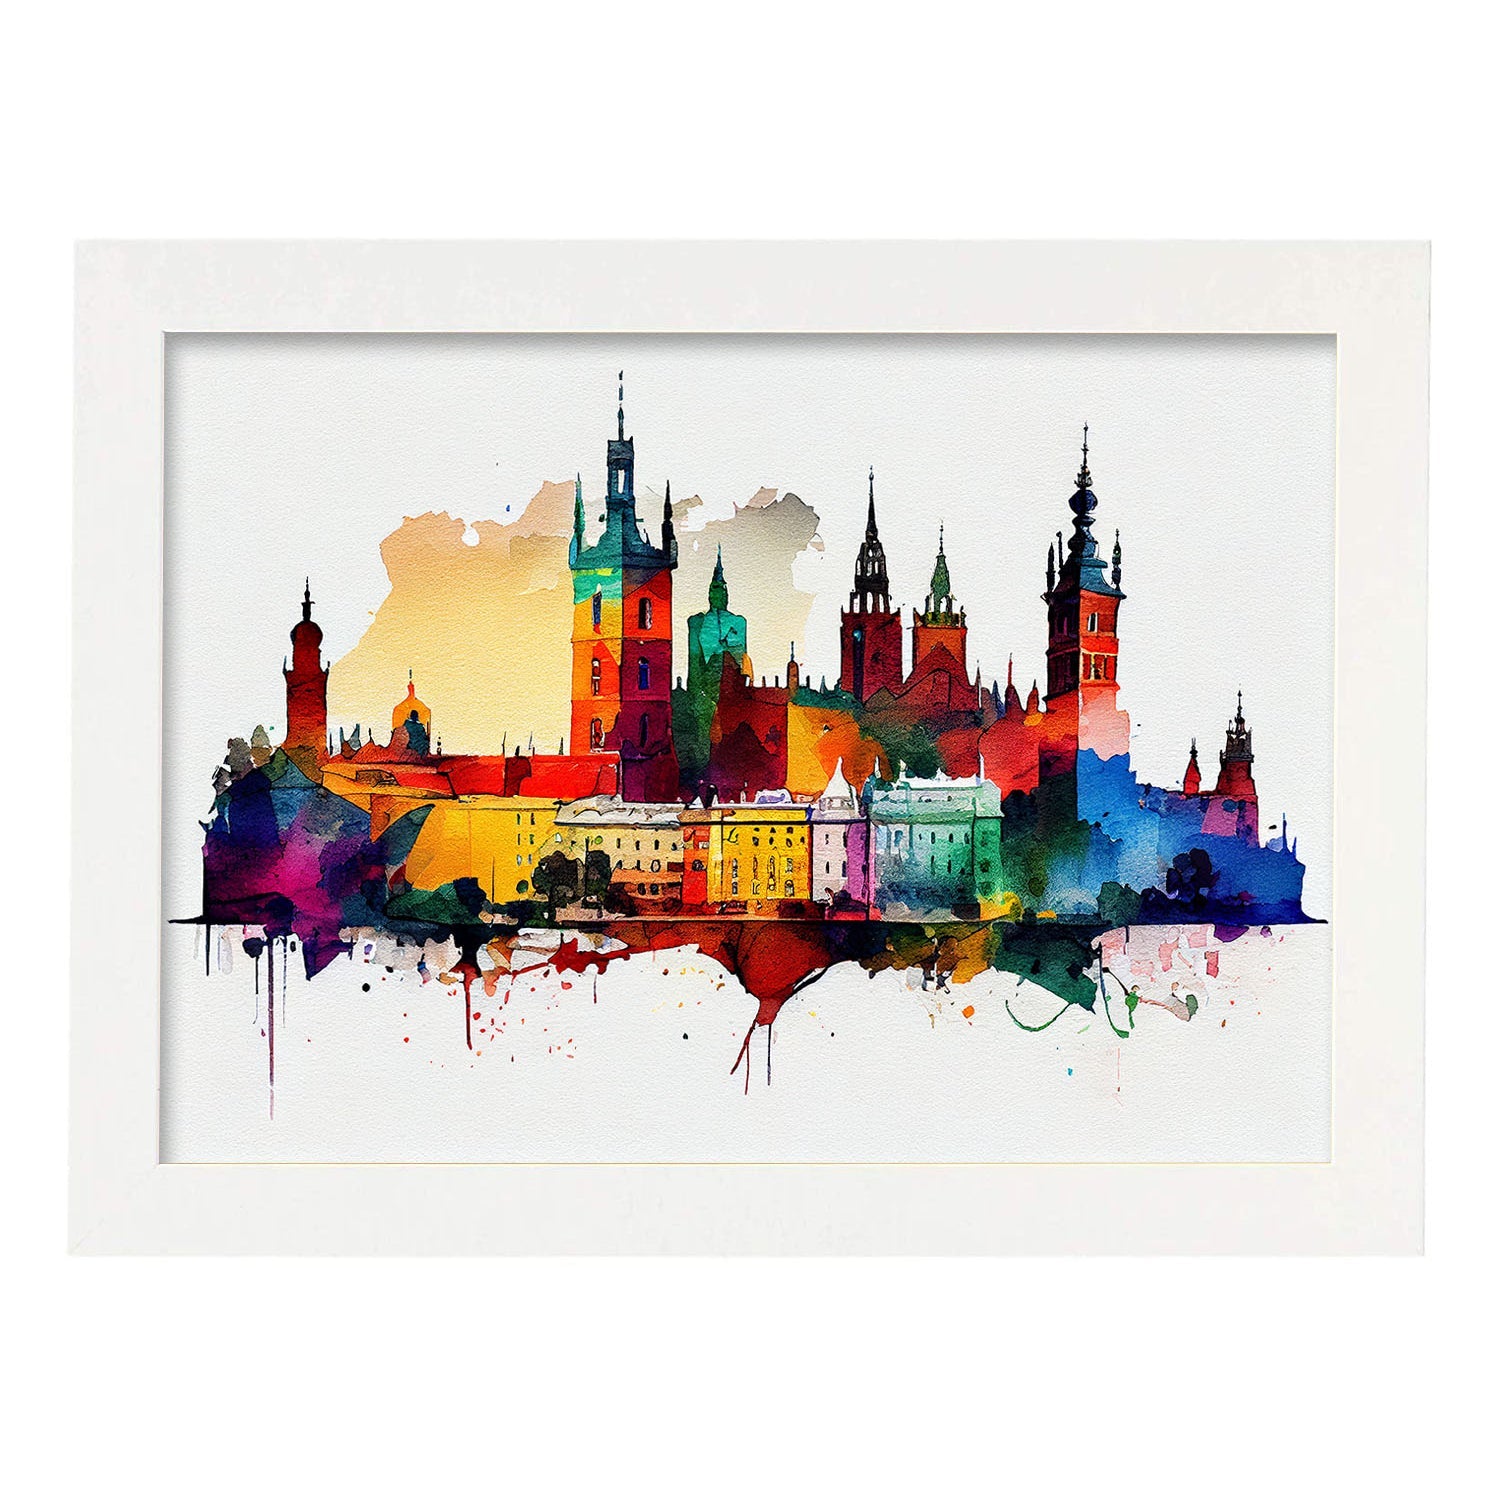 Nacnic watercolor of a skyline of the city of Krakow_2. Aesthetic Wall Art Prints for Bedroom or Living Room Design.-Artwork-Nacnic-A4-Marco Blanco-Nacnic Estudio SL